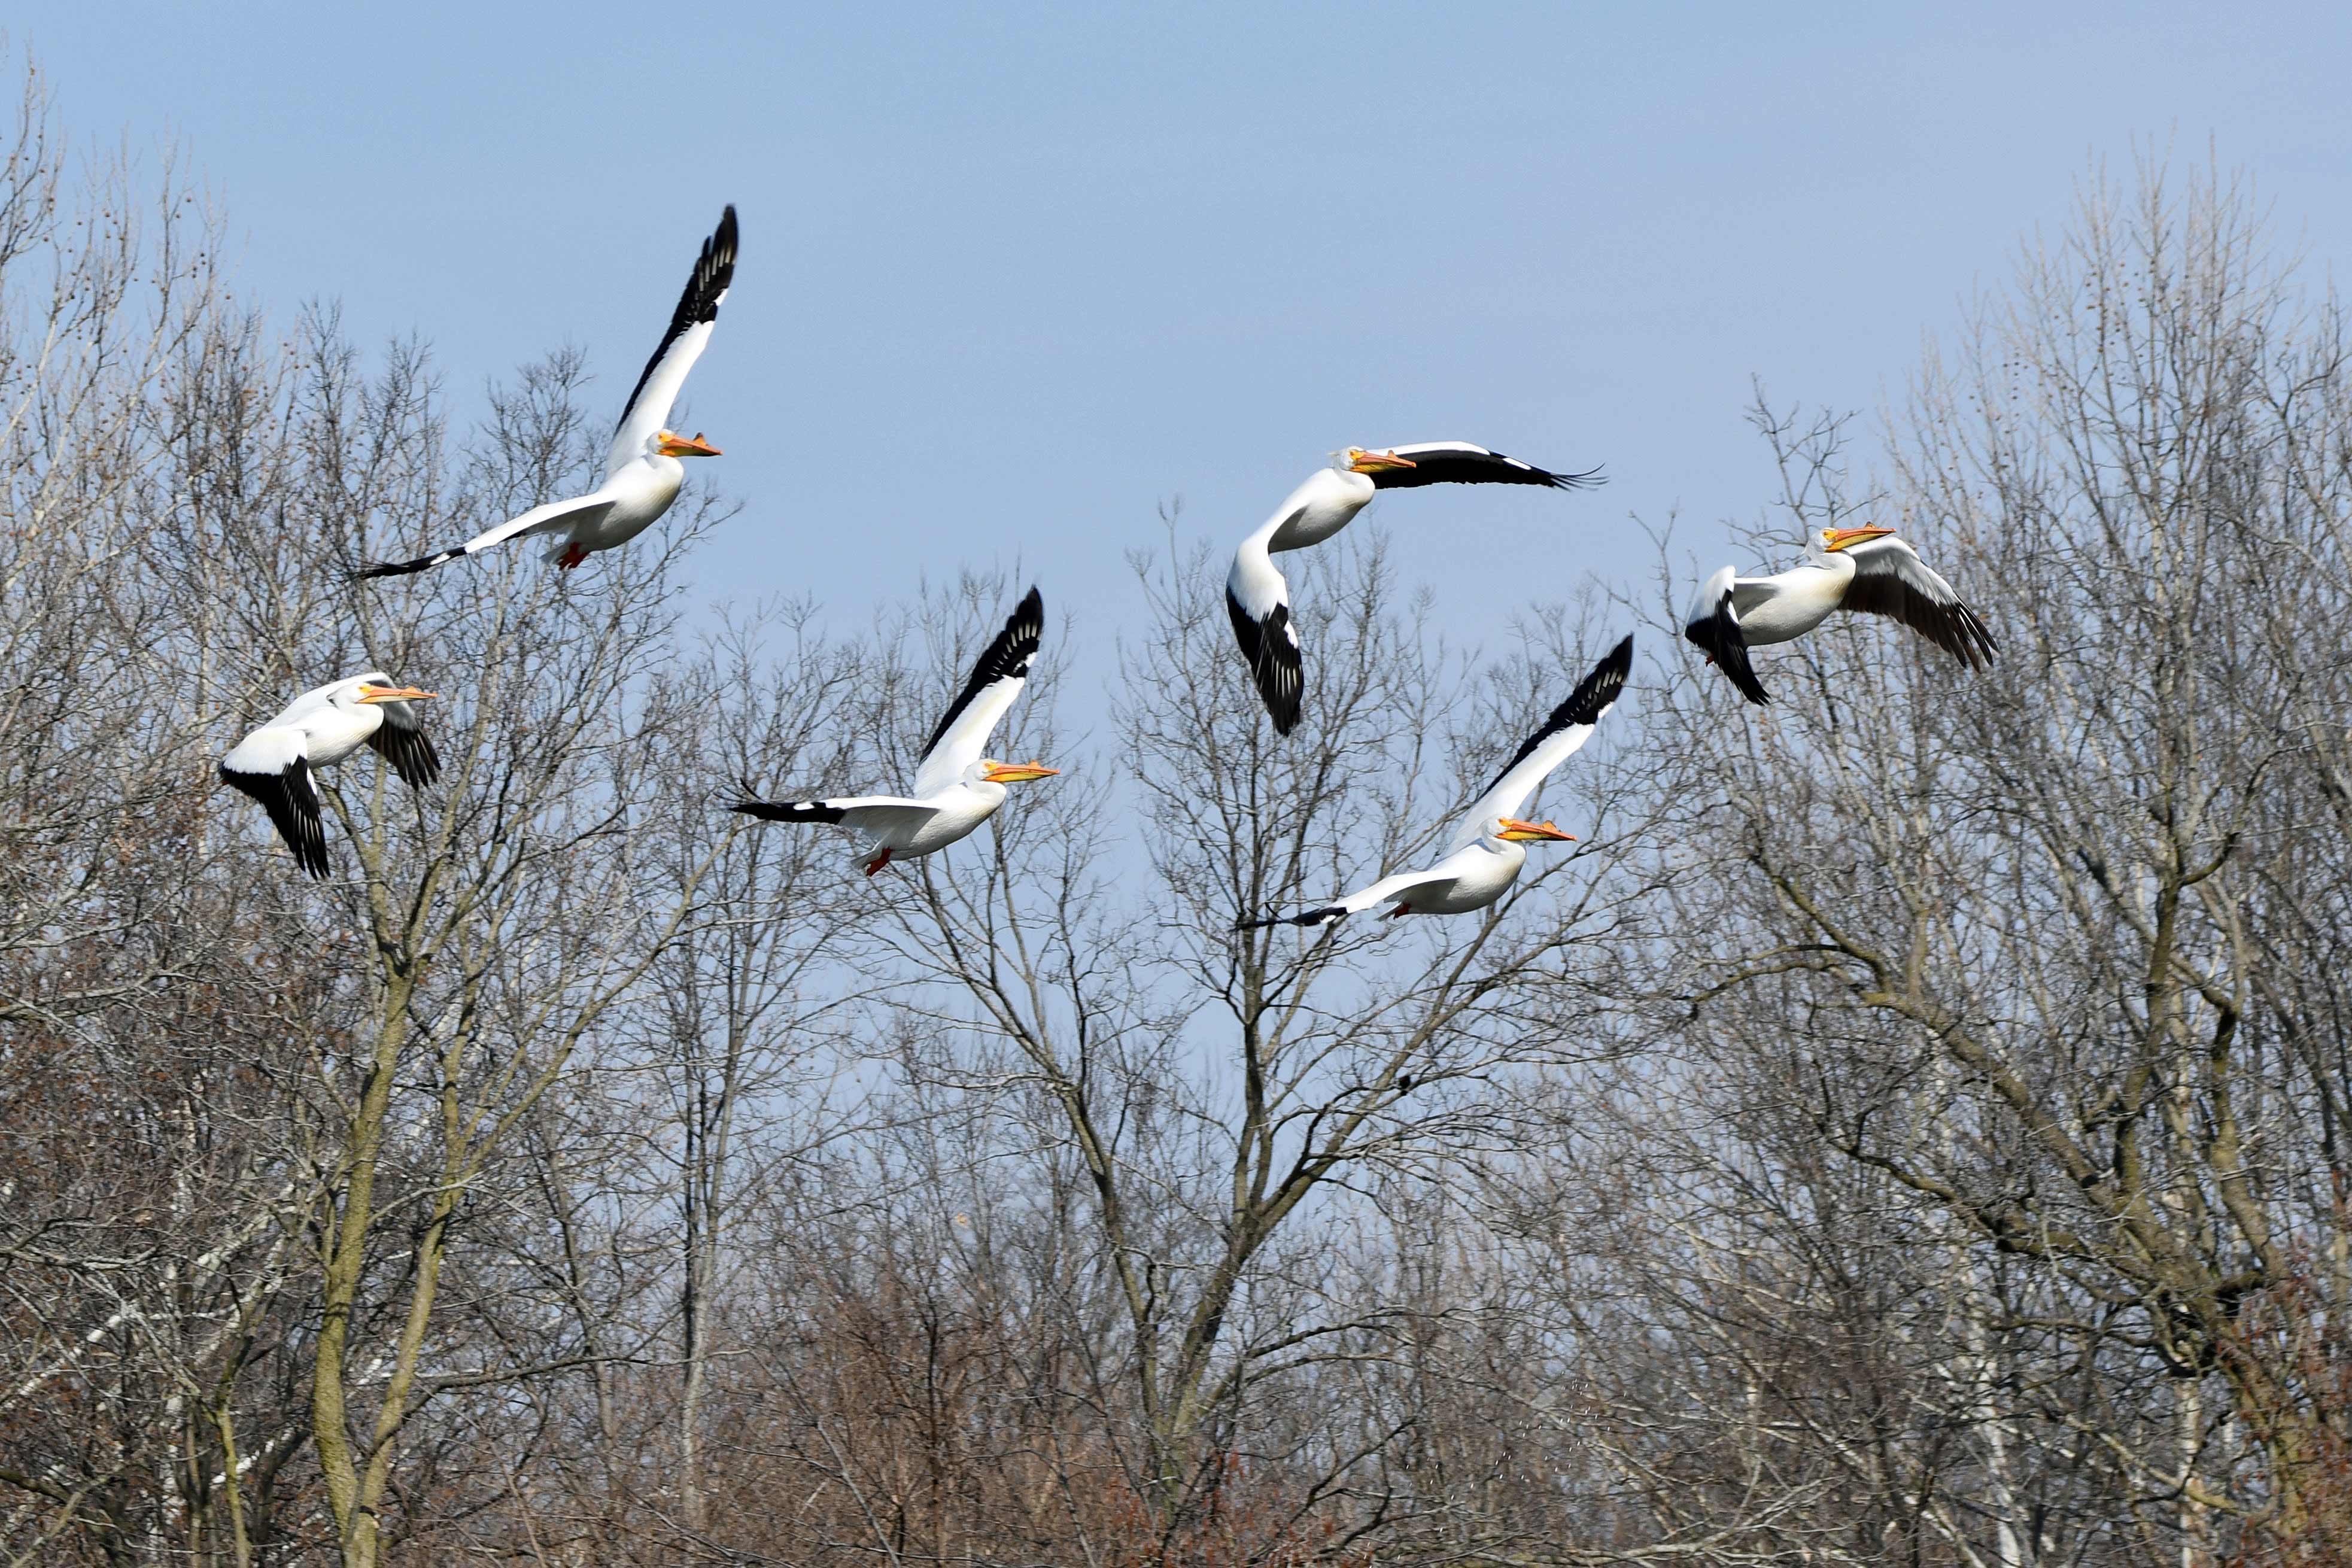 A group of American white pelicans in flight.